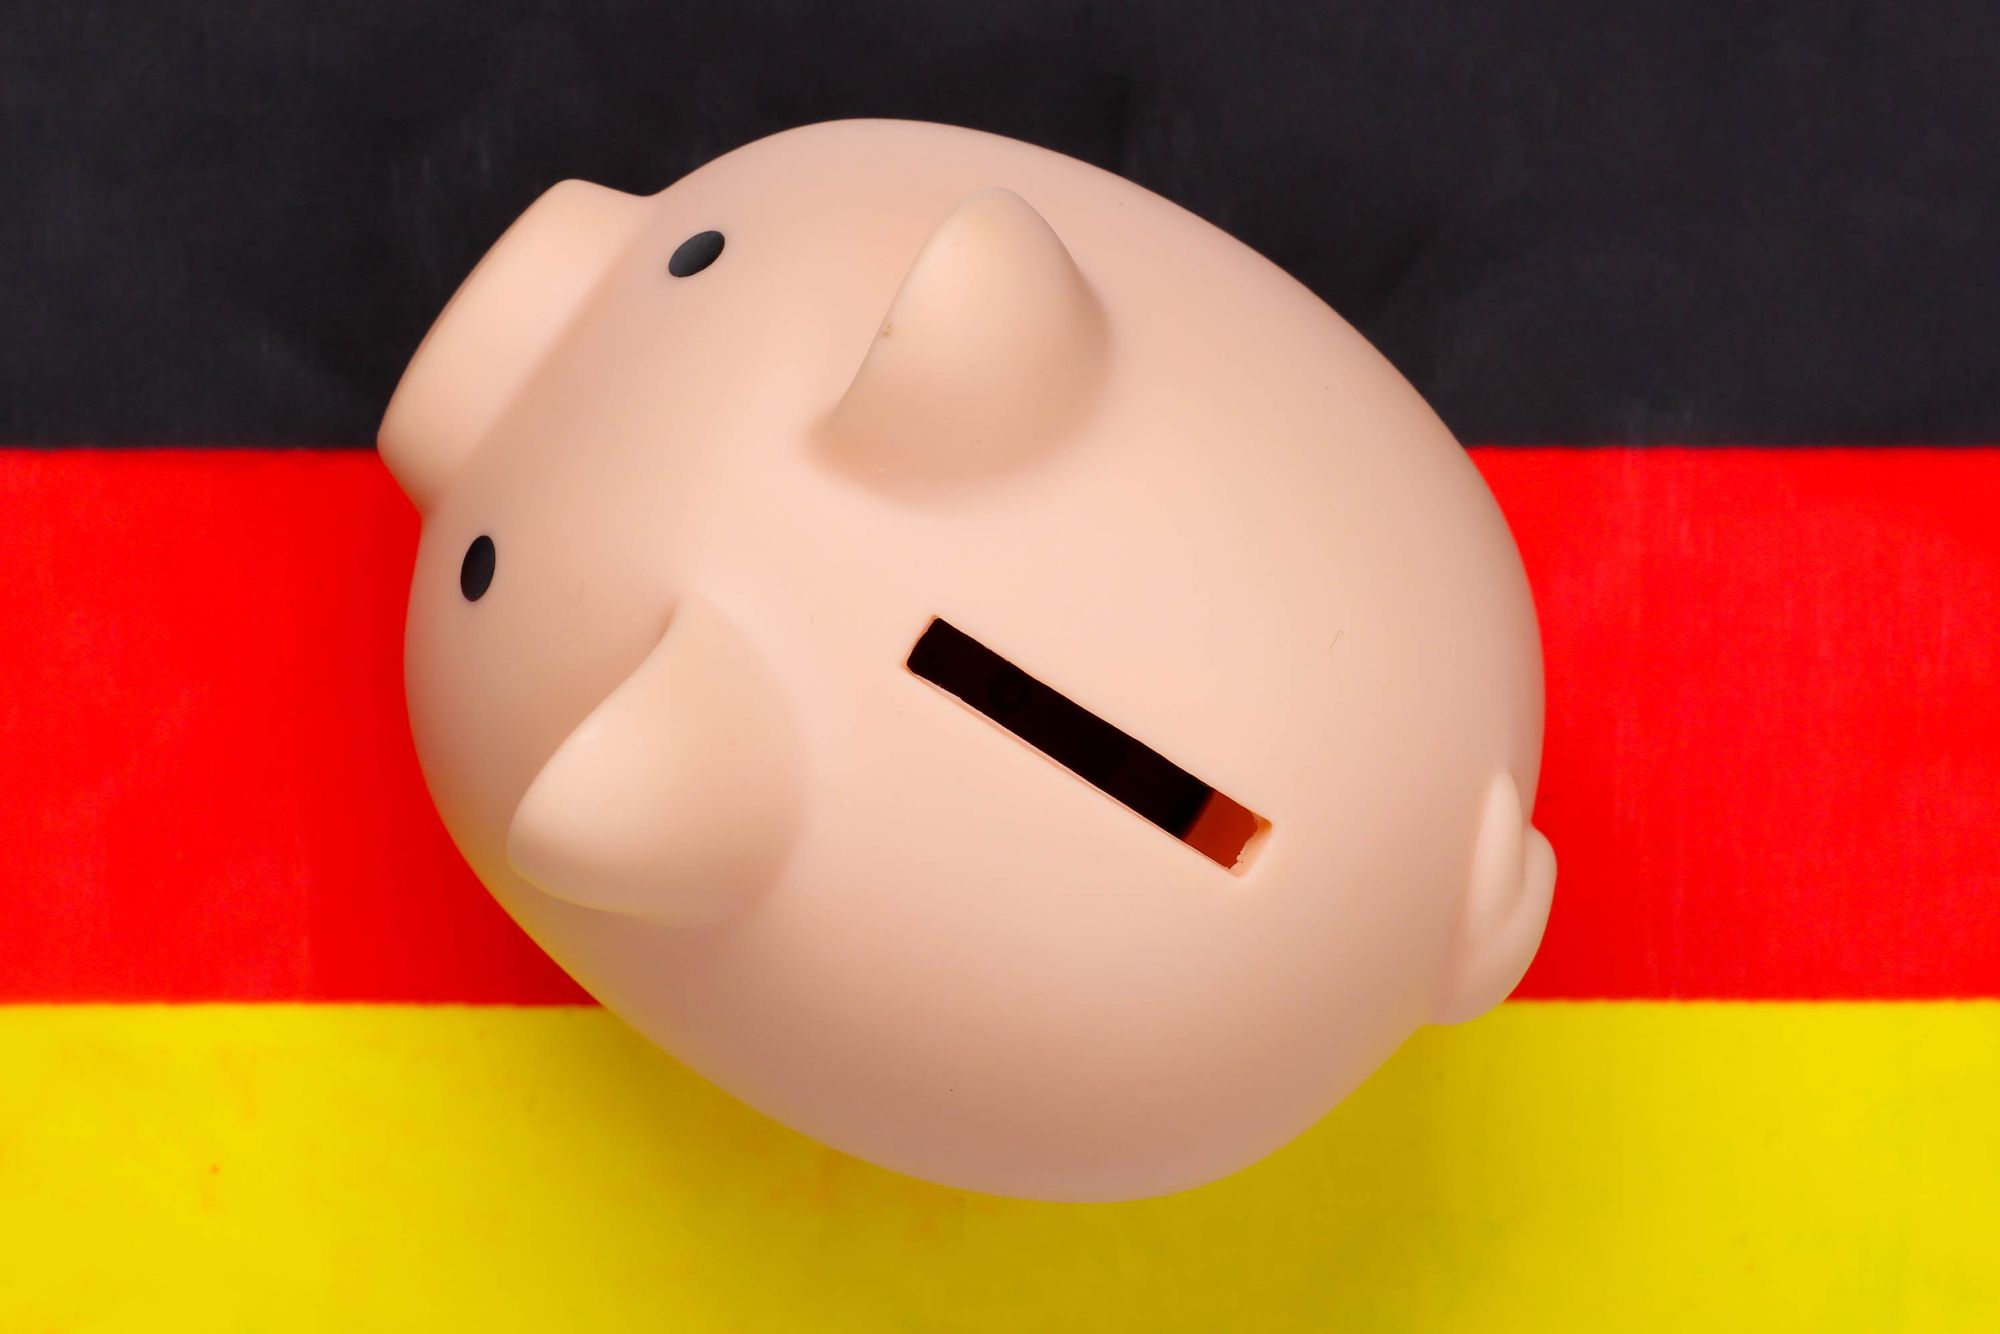 The well-known German bank offers crypto certificates for savings plans